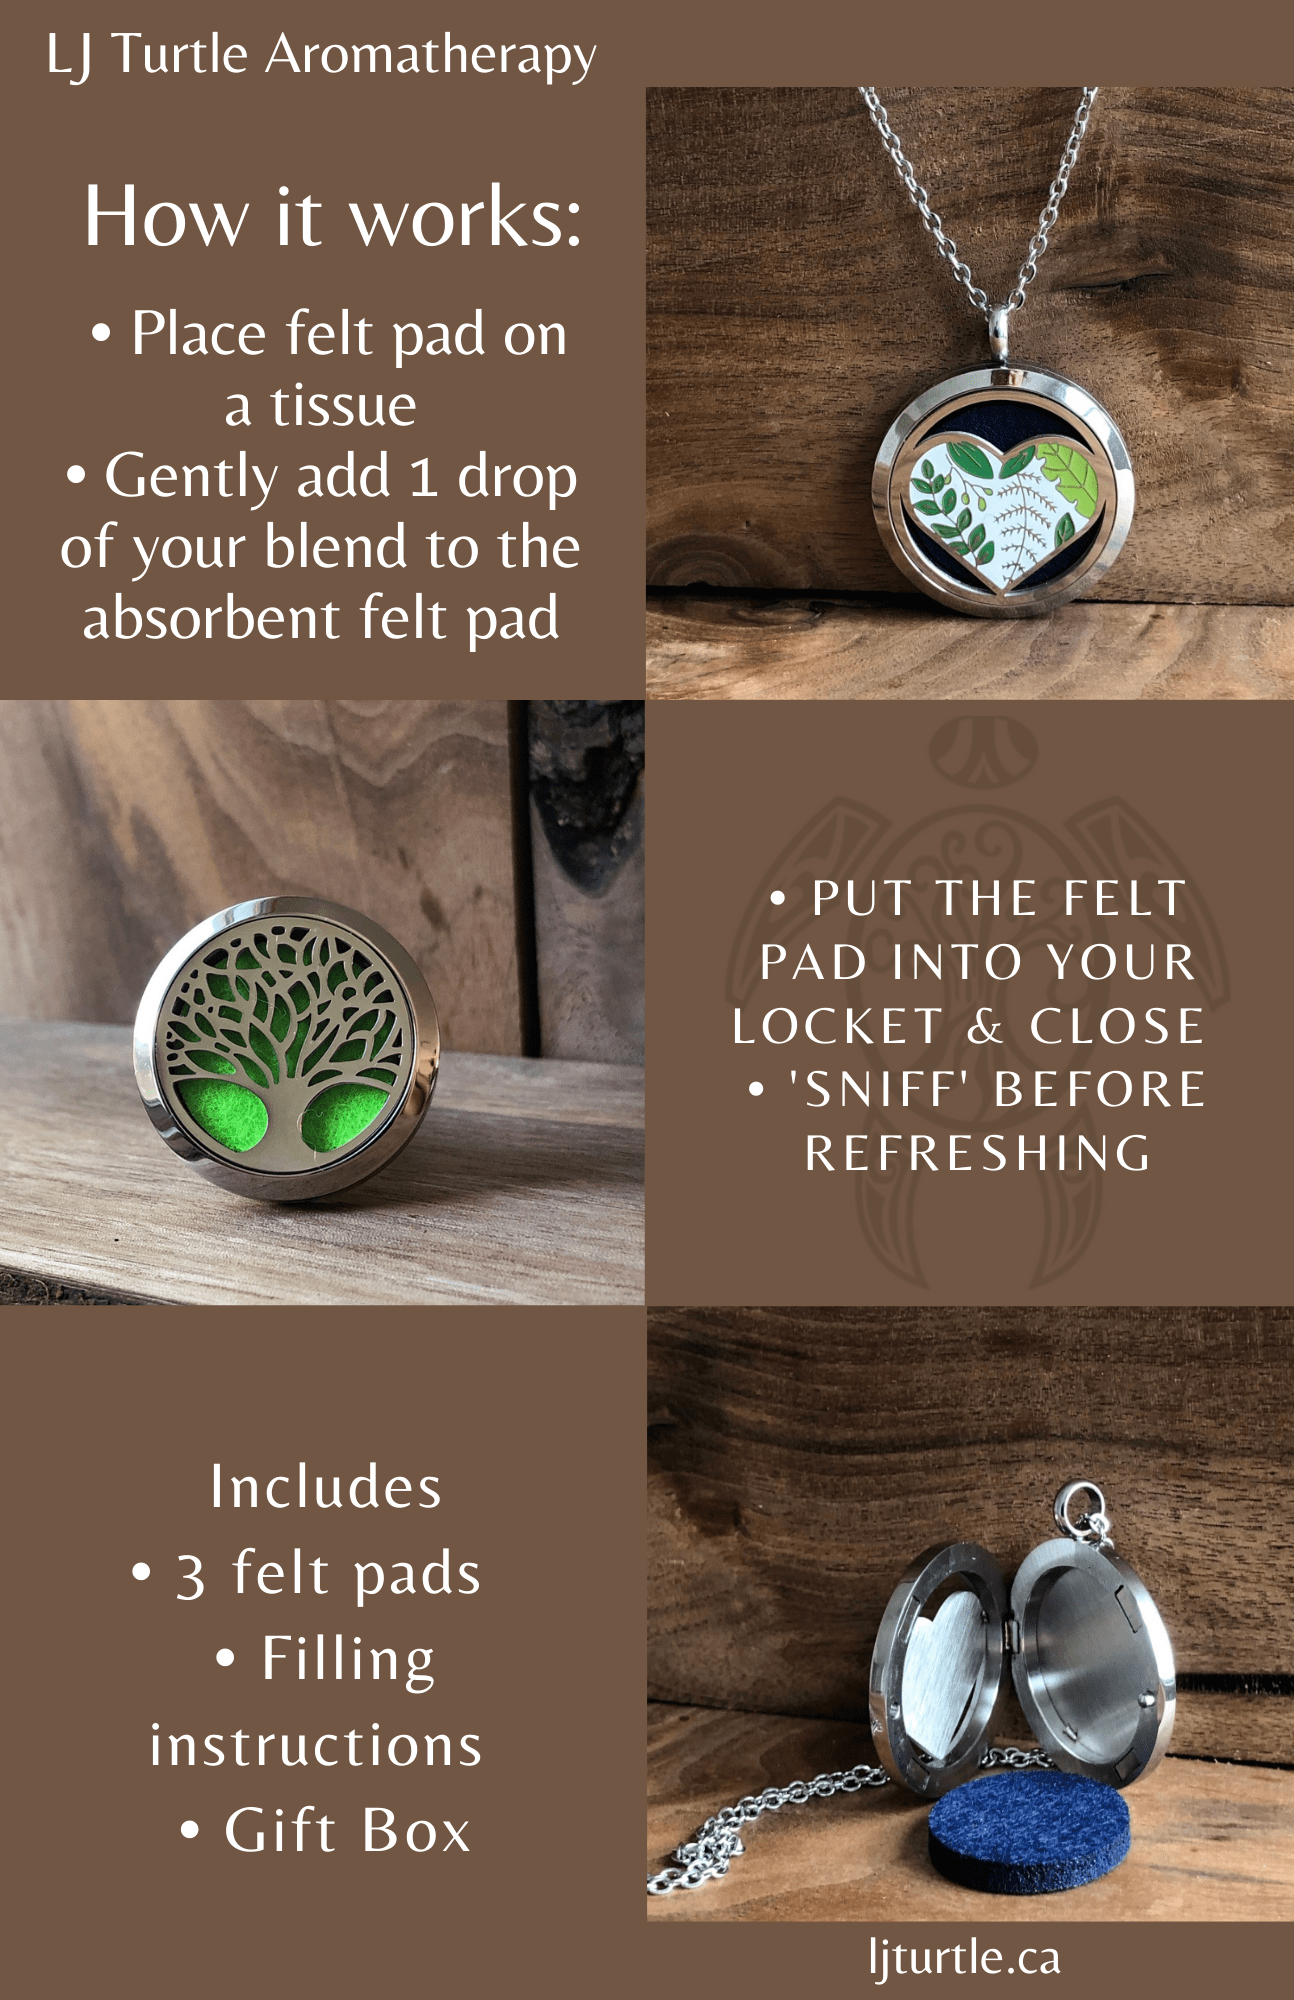 LJ Turtle Aromatherapy & Accessories Leaves | Stainless Steel Brooch